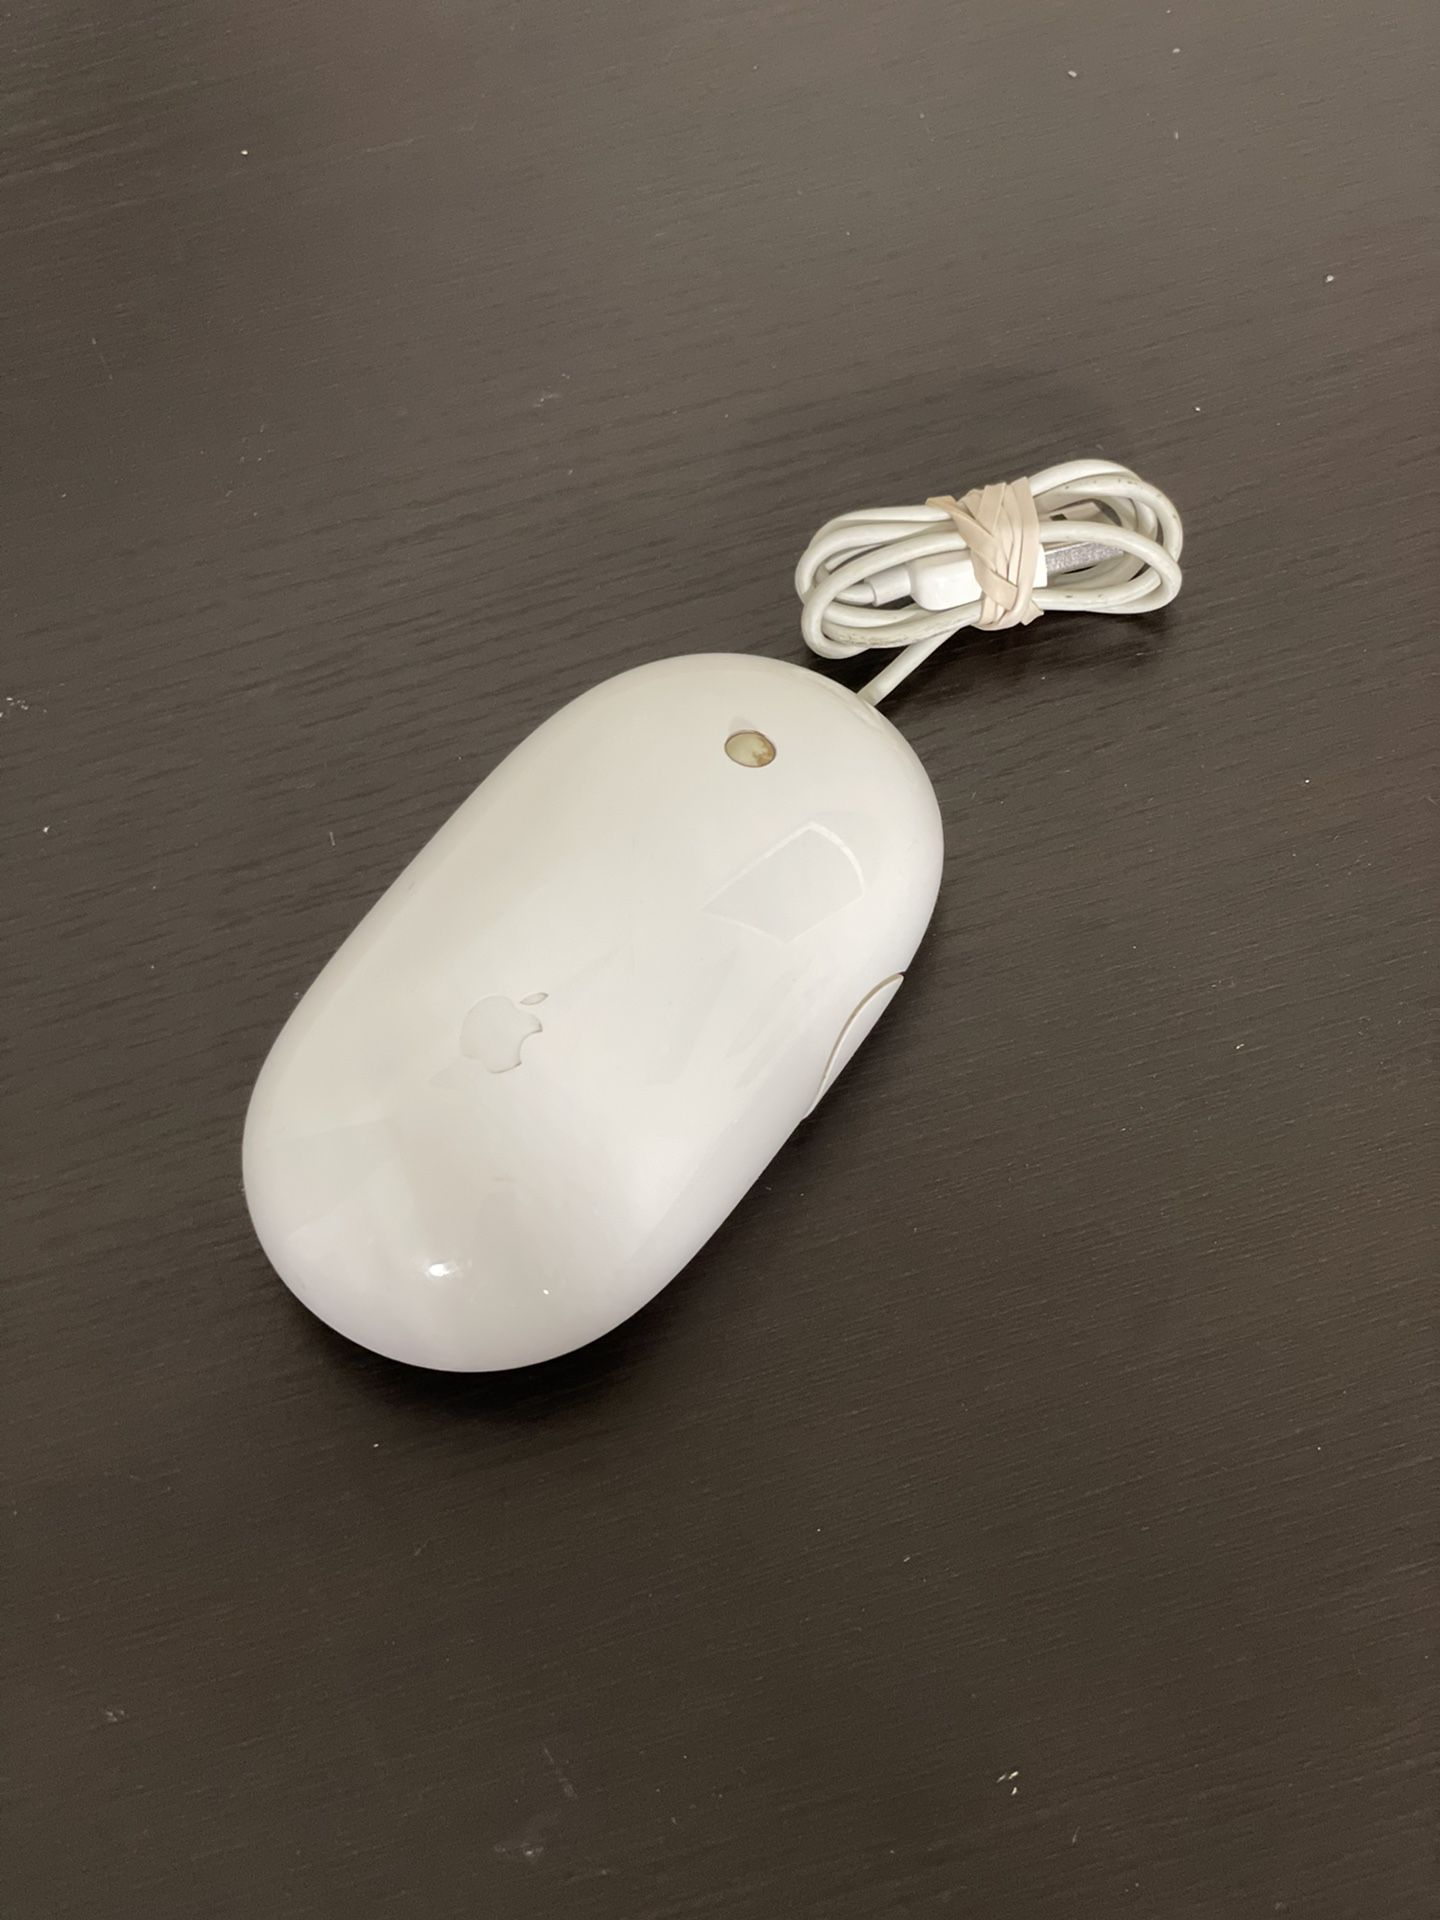 Genuine OEM Apple Mighty Mouse Wired USB A1152